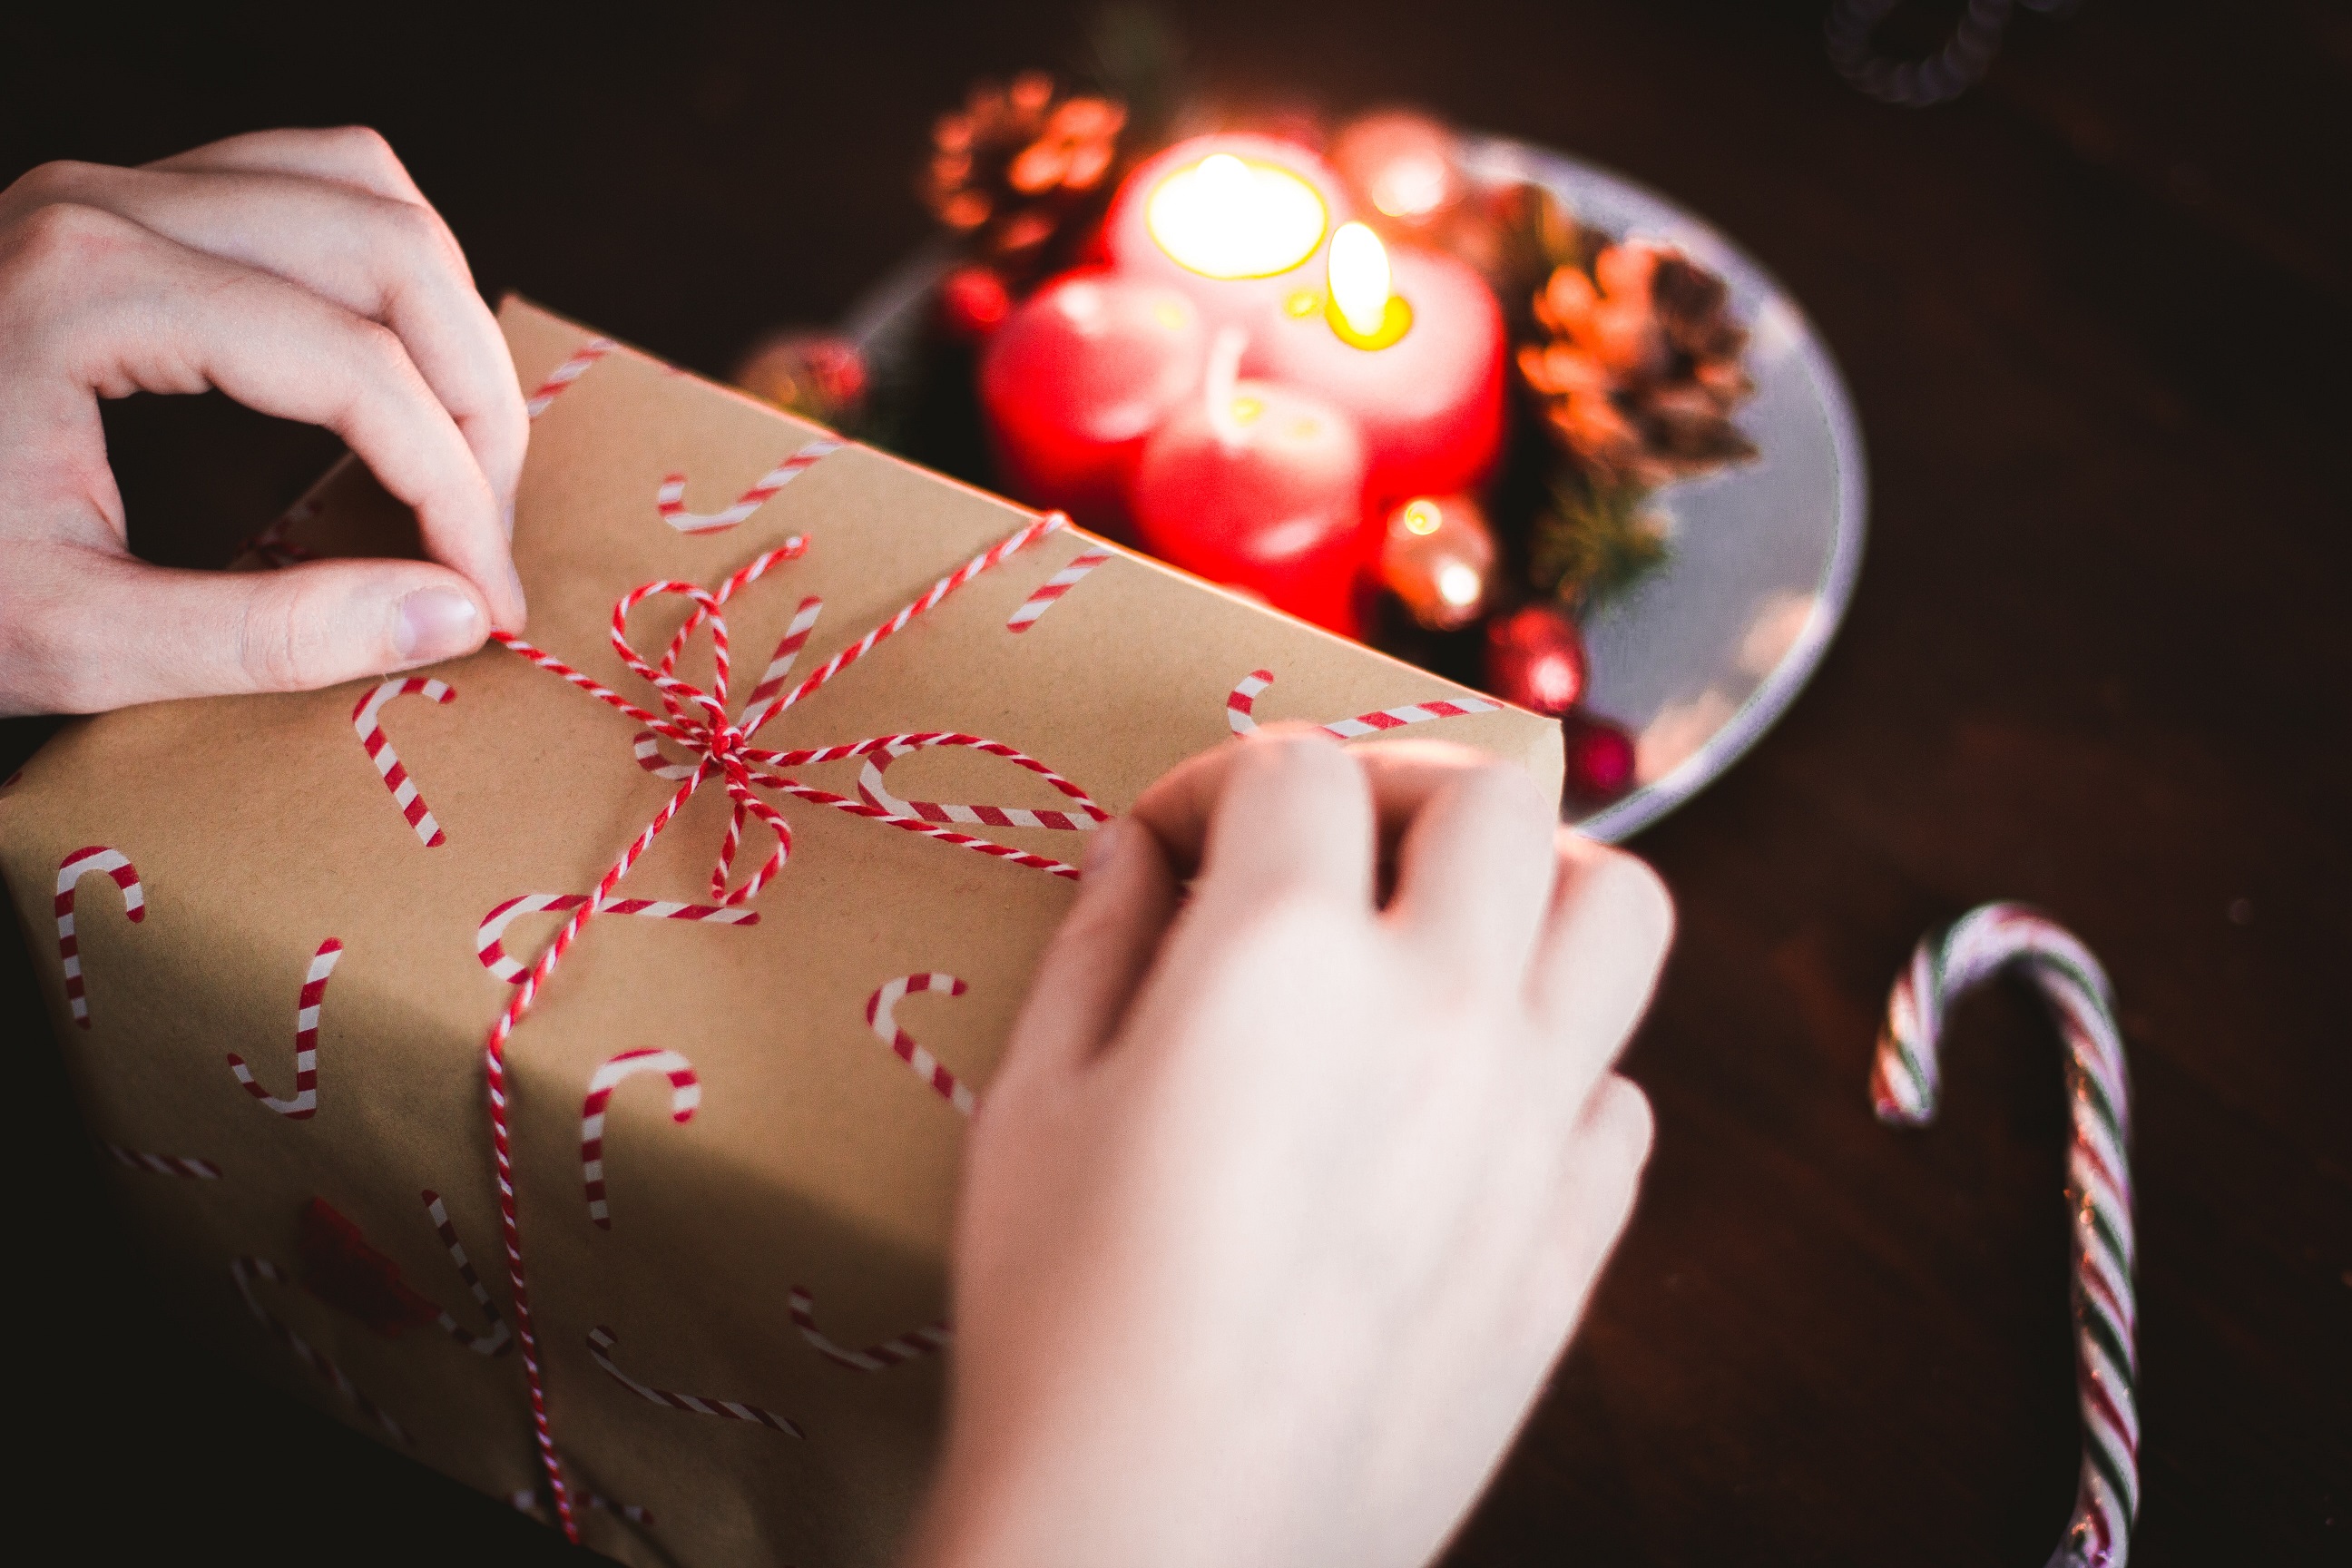 Two white hands pictured unfastening the red ribbon bow on the top of a brown paper packaging parcel which has red and white candy canes decorating it